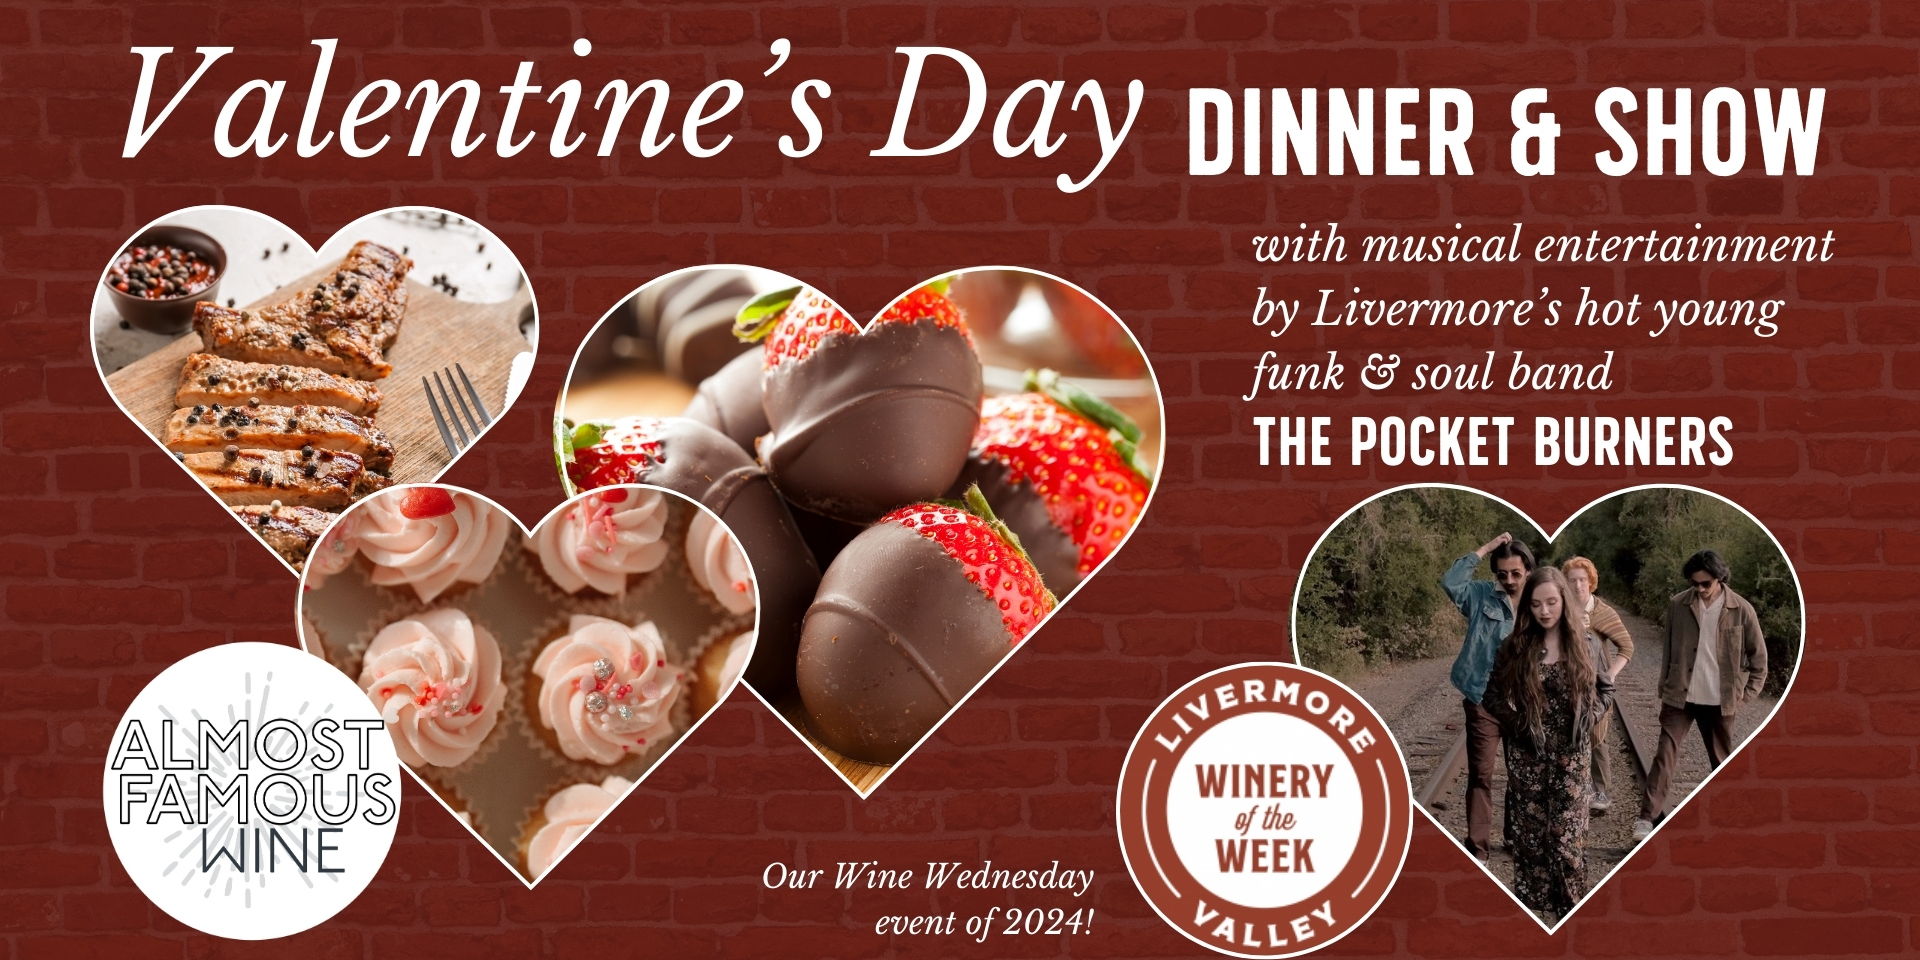 Valentine's Day Dinner & Show with The Pocket Burners promotional image